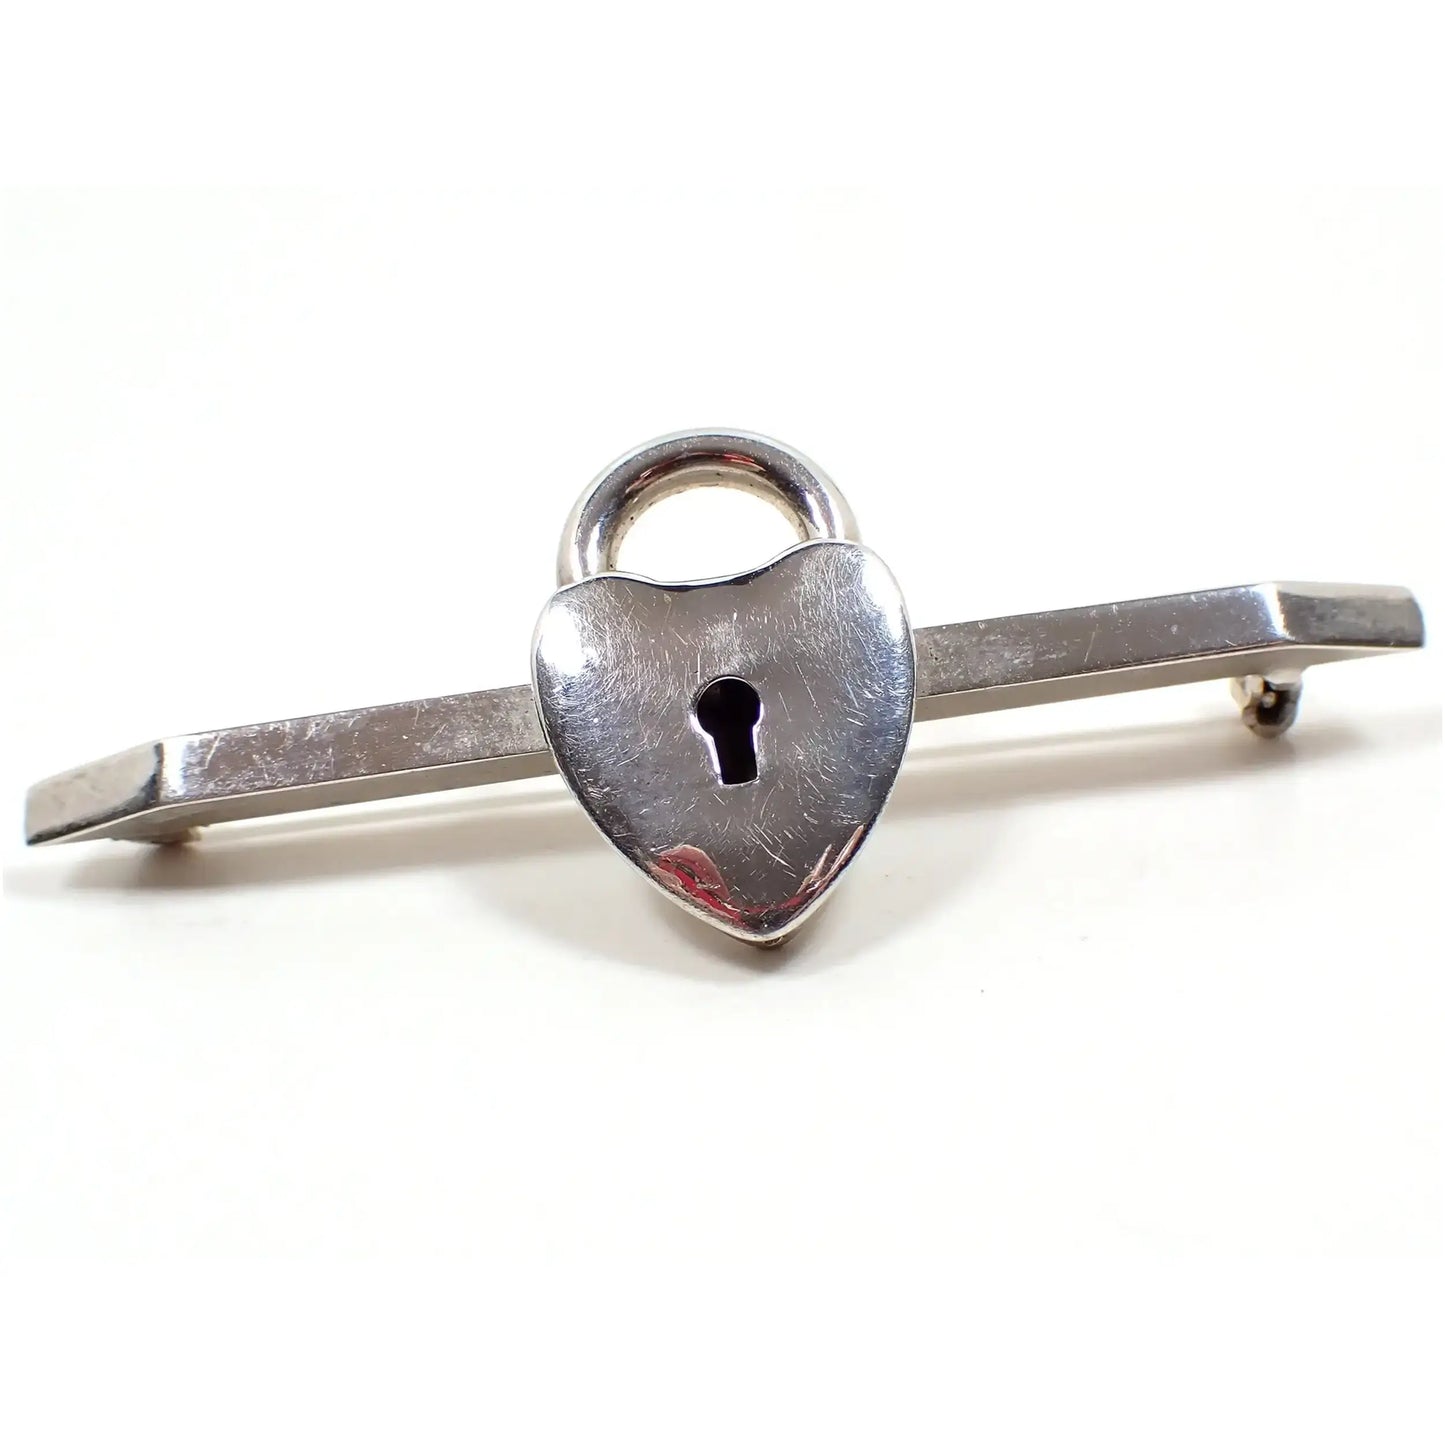 Enlarged view of the retro vintage padlock style bar brooch. The bar is angled on the ends and the metal is silver tone in color. In the middle is a fake lock shaped like a heart that has a skeleton key hold in the middle.